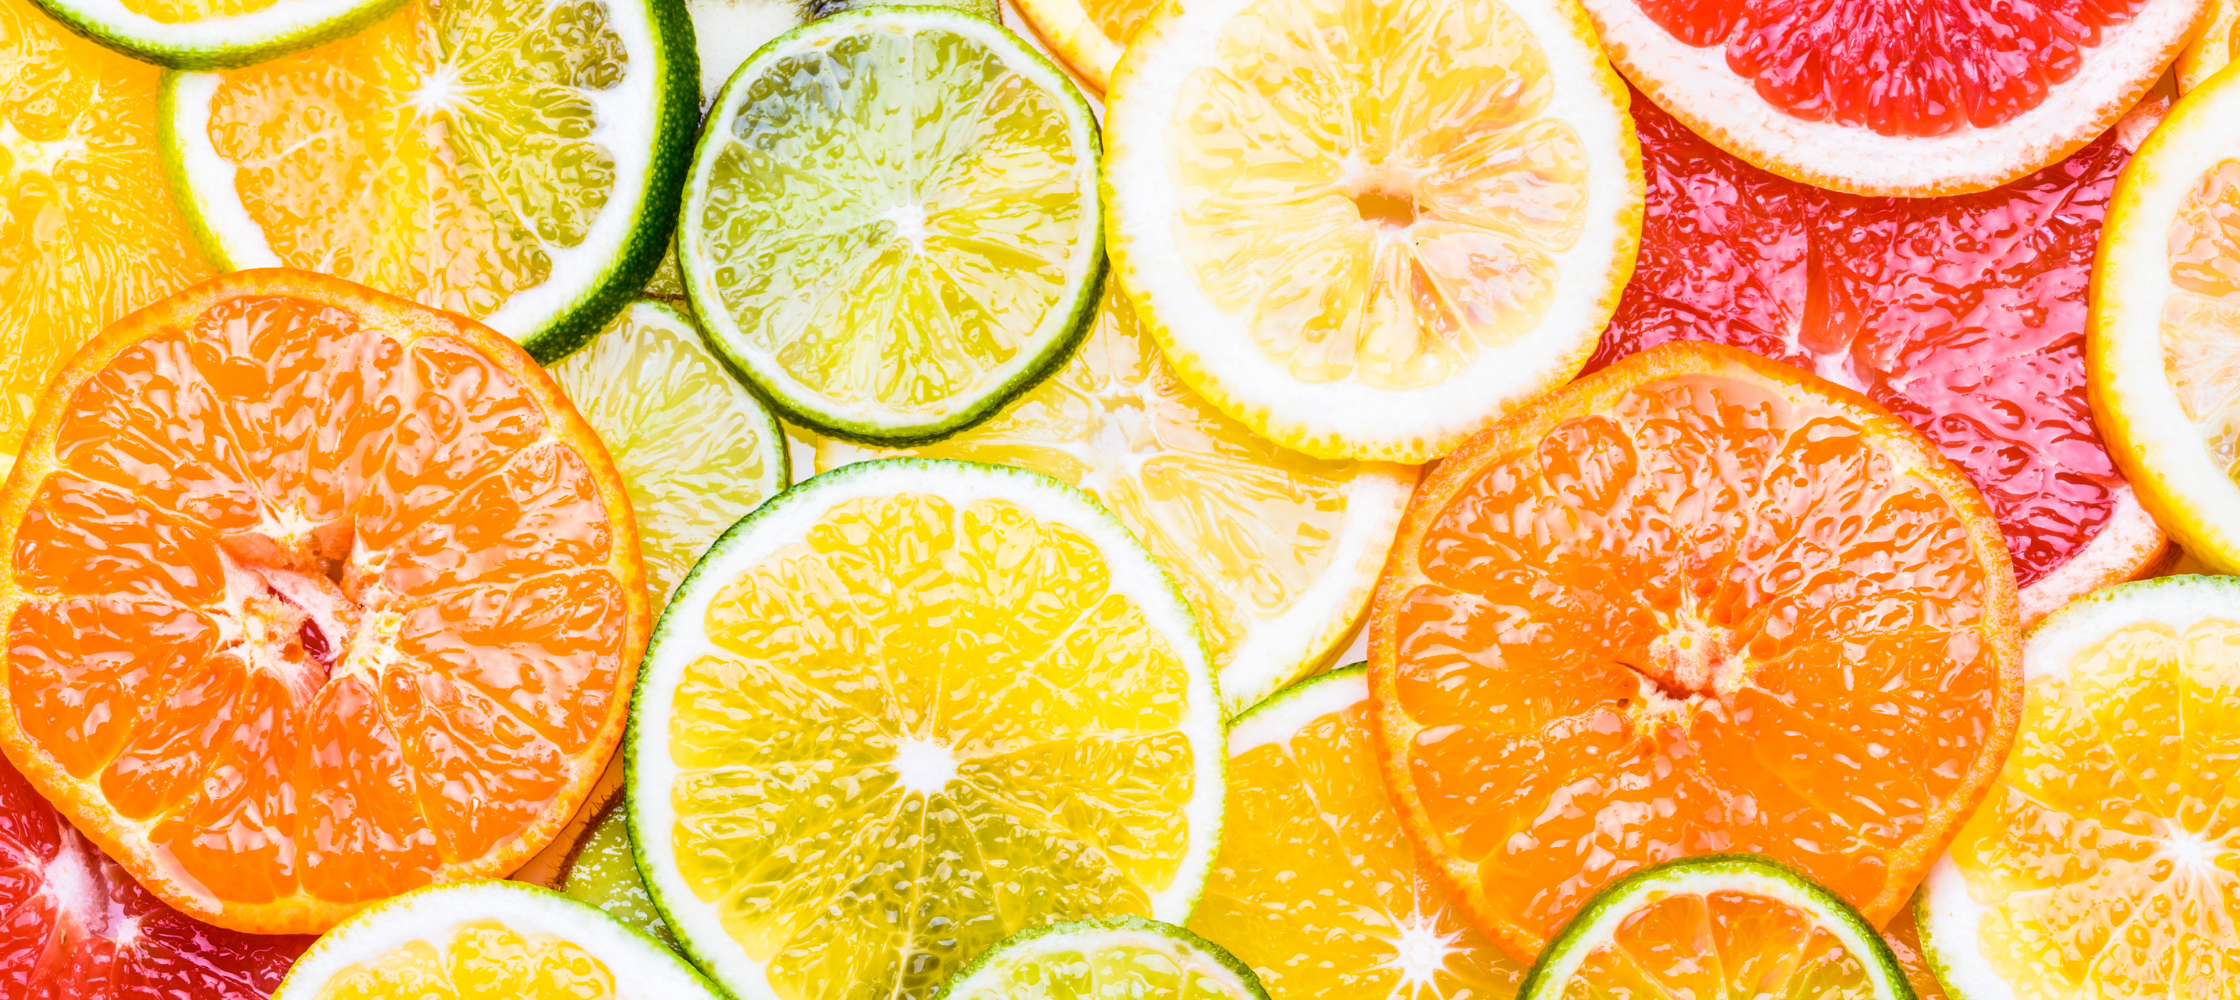 Image to represent Vitamin C absorbing in skin portrayed by a selection of citrus fruits